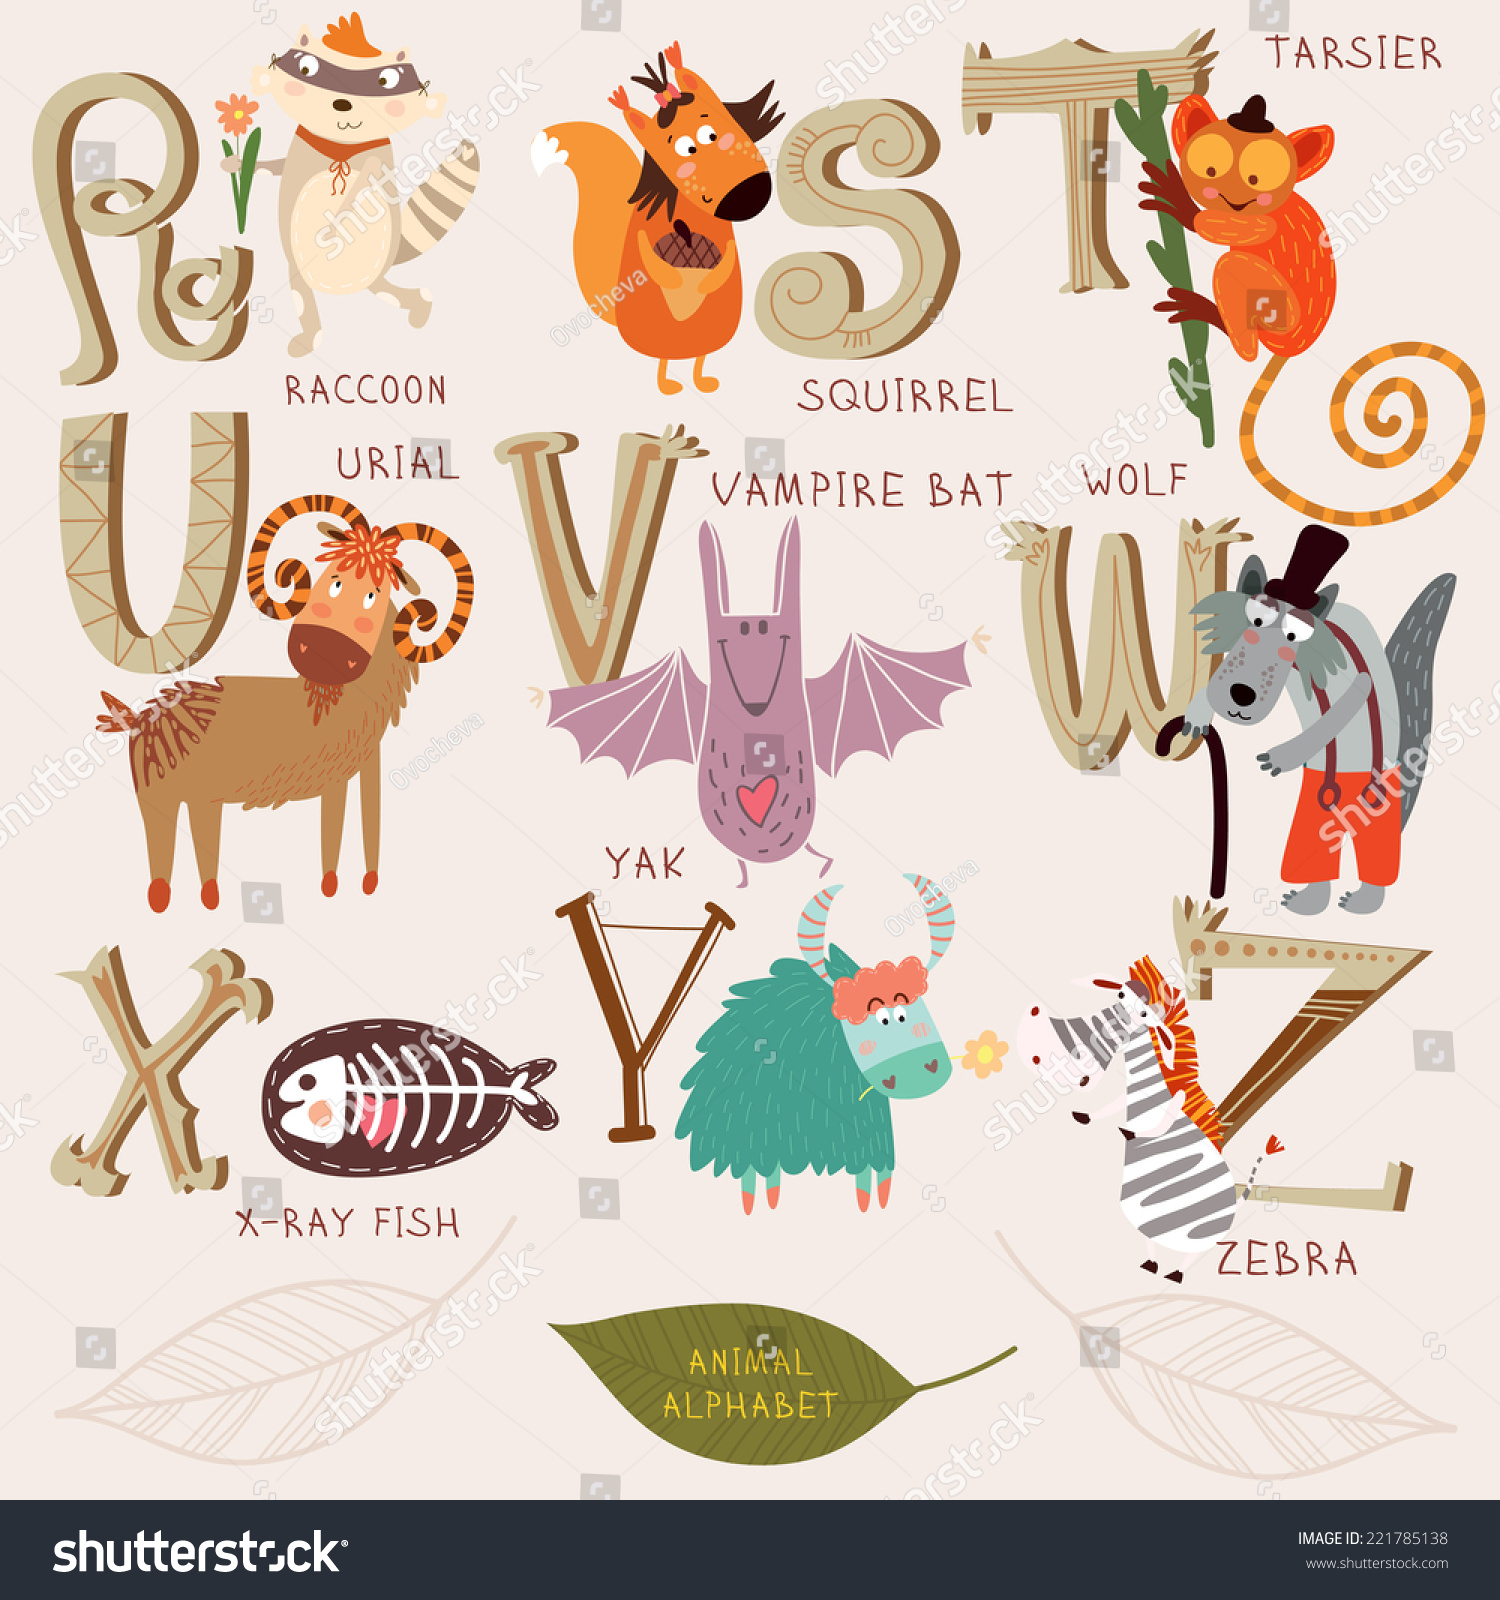 Animal That Starts With The Letter X Inspec Wallp Animals